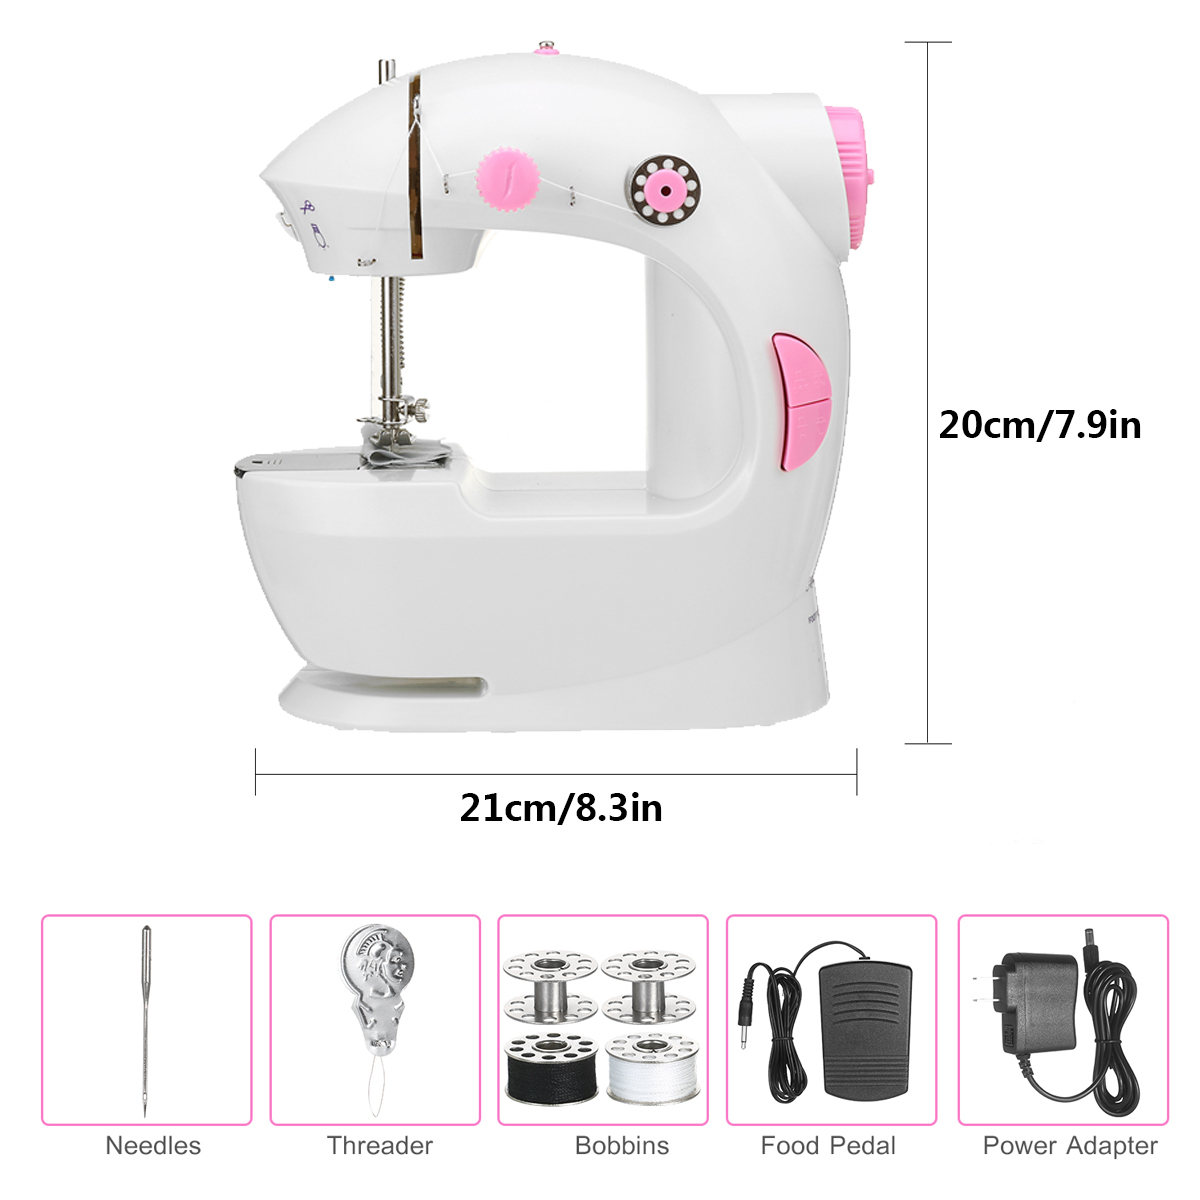 Household-Electric-Sewing-Machine-Mini-Portable-Speed-Adjustable-Sewing-Machine-1725564-8